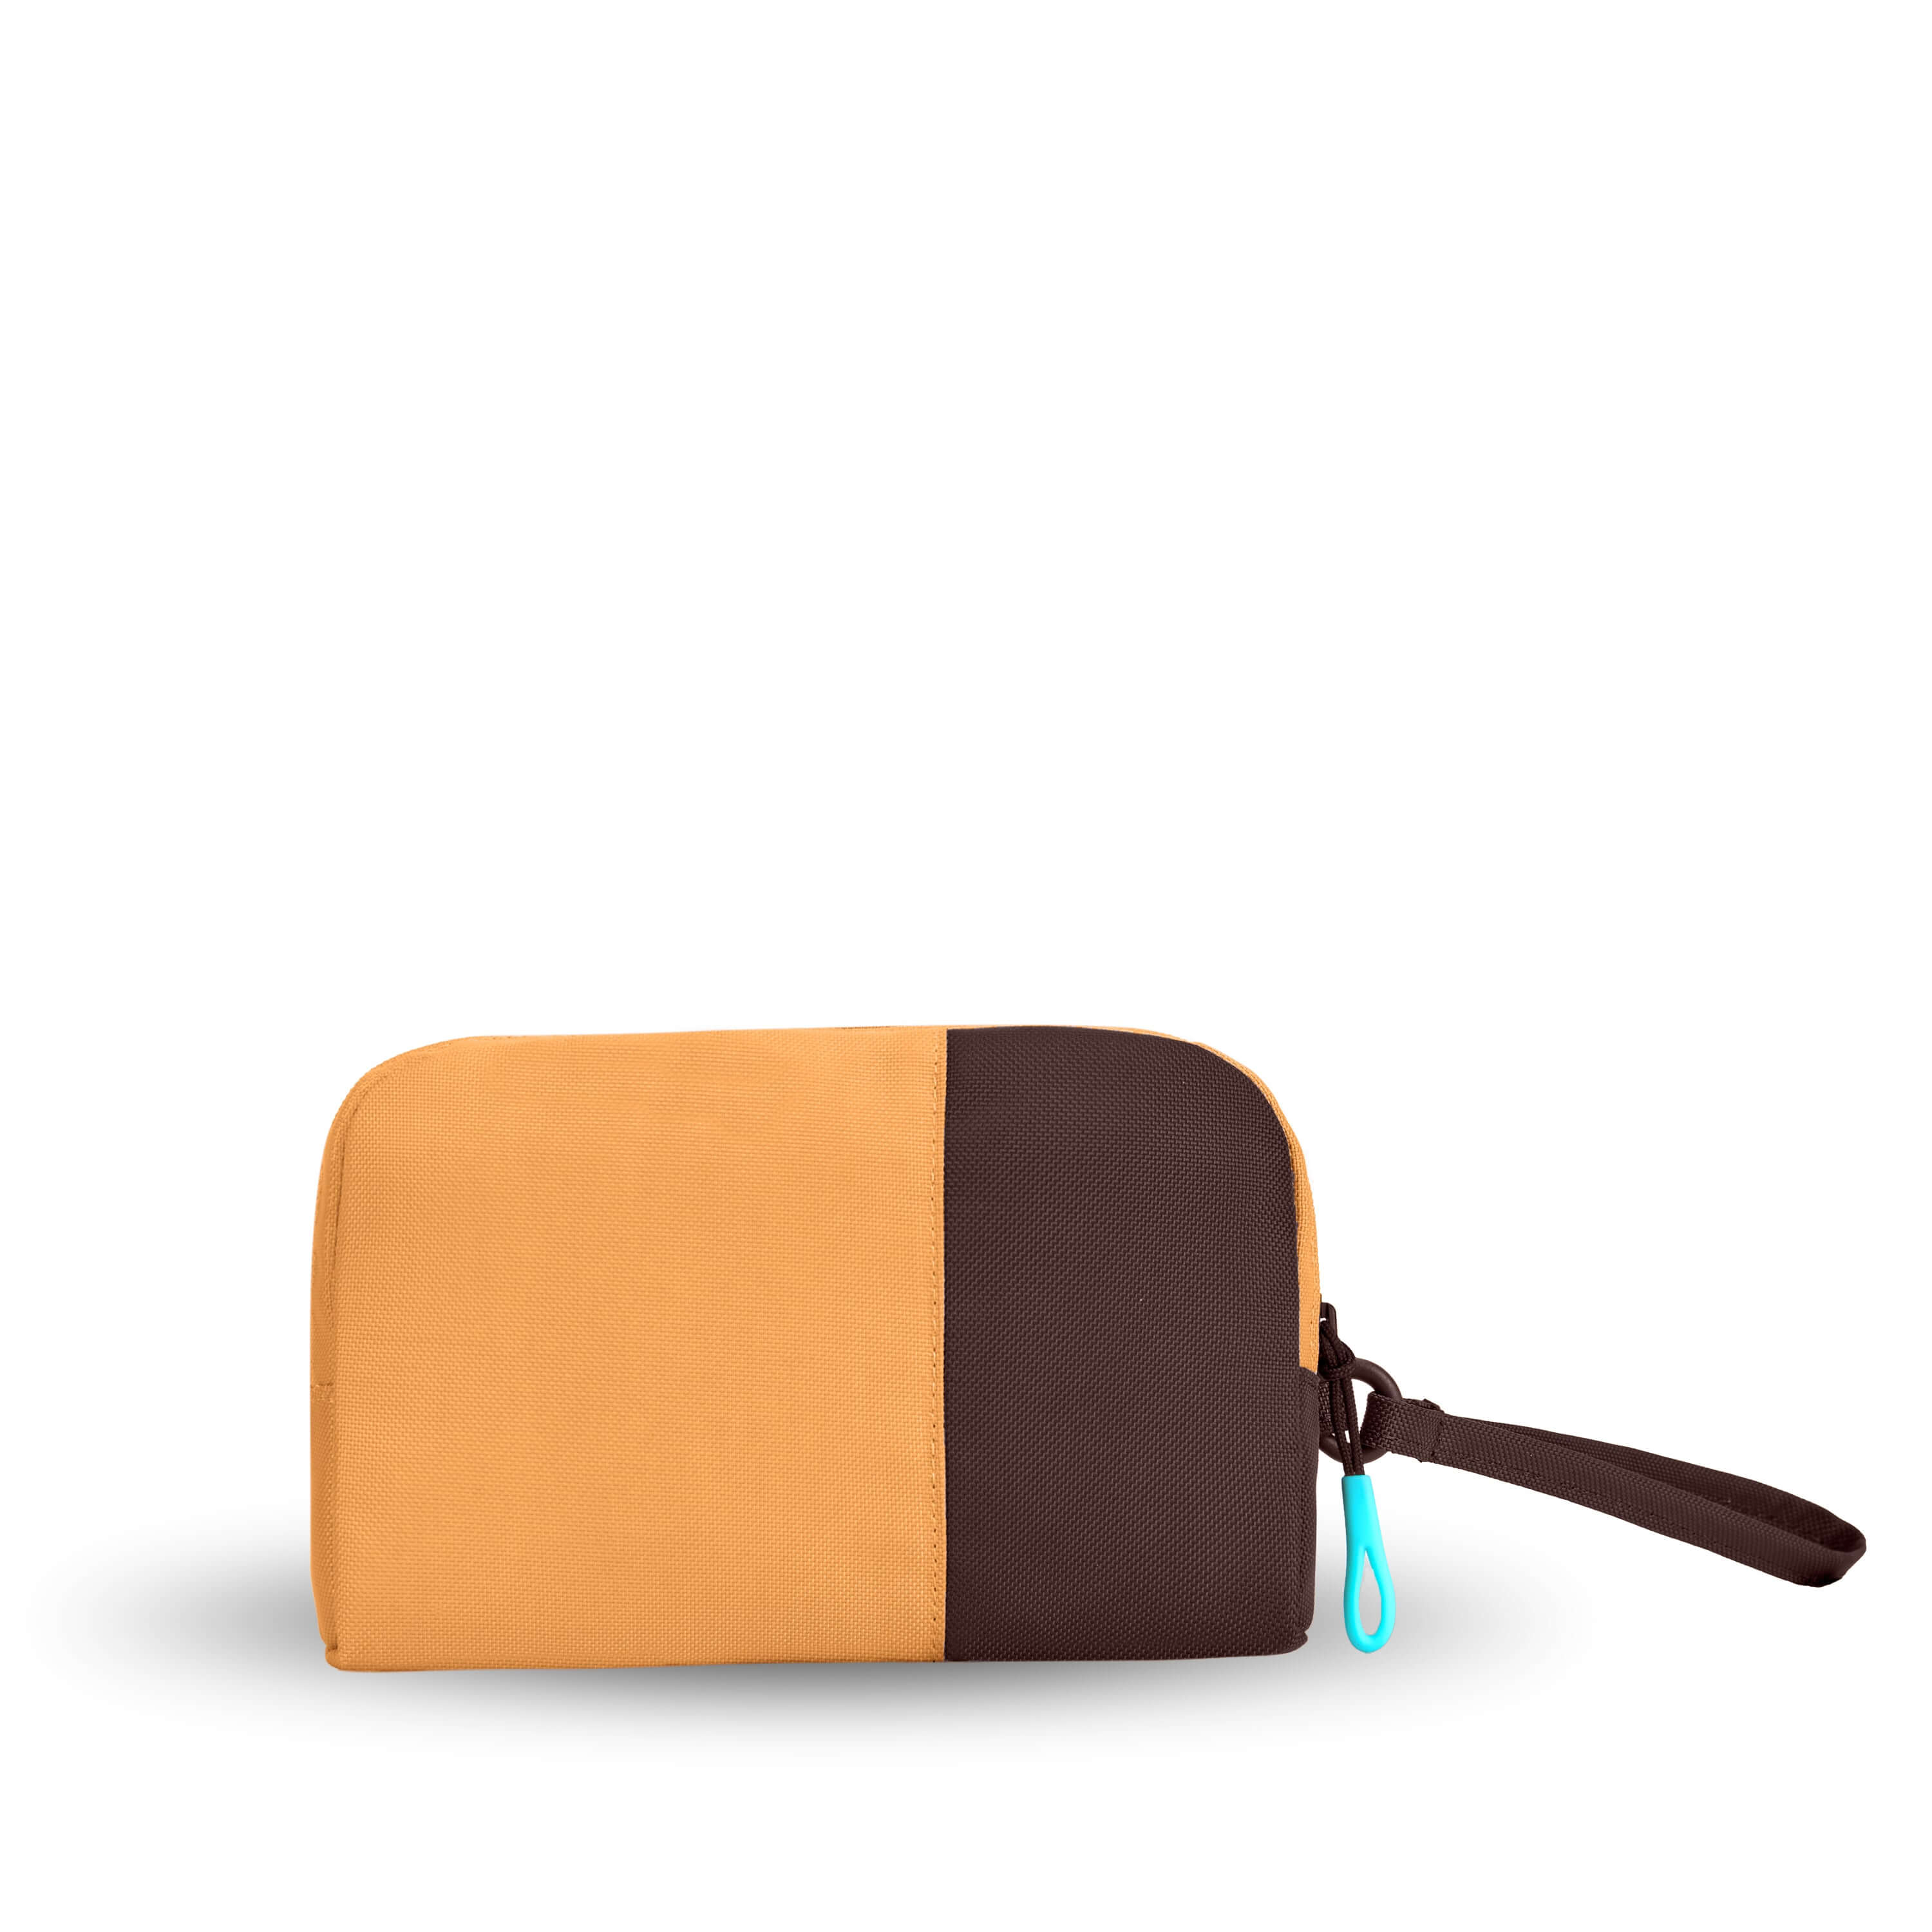 Back view of Sherpani travel accessory, the Jolie in Sundial, in small size. The pouch is two-toned in burnt yellow and brown. It features a brown wristlet strap and an easy-pull zipper accented in aqua. 